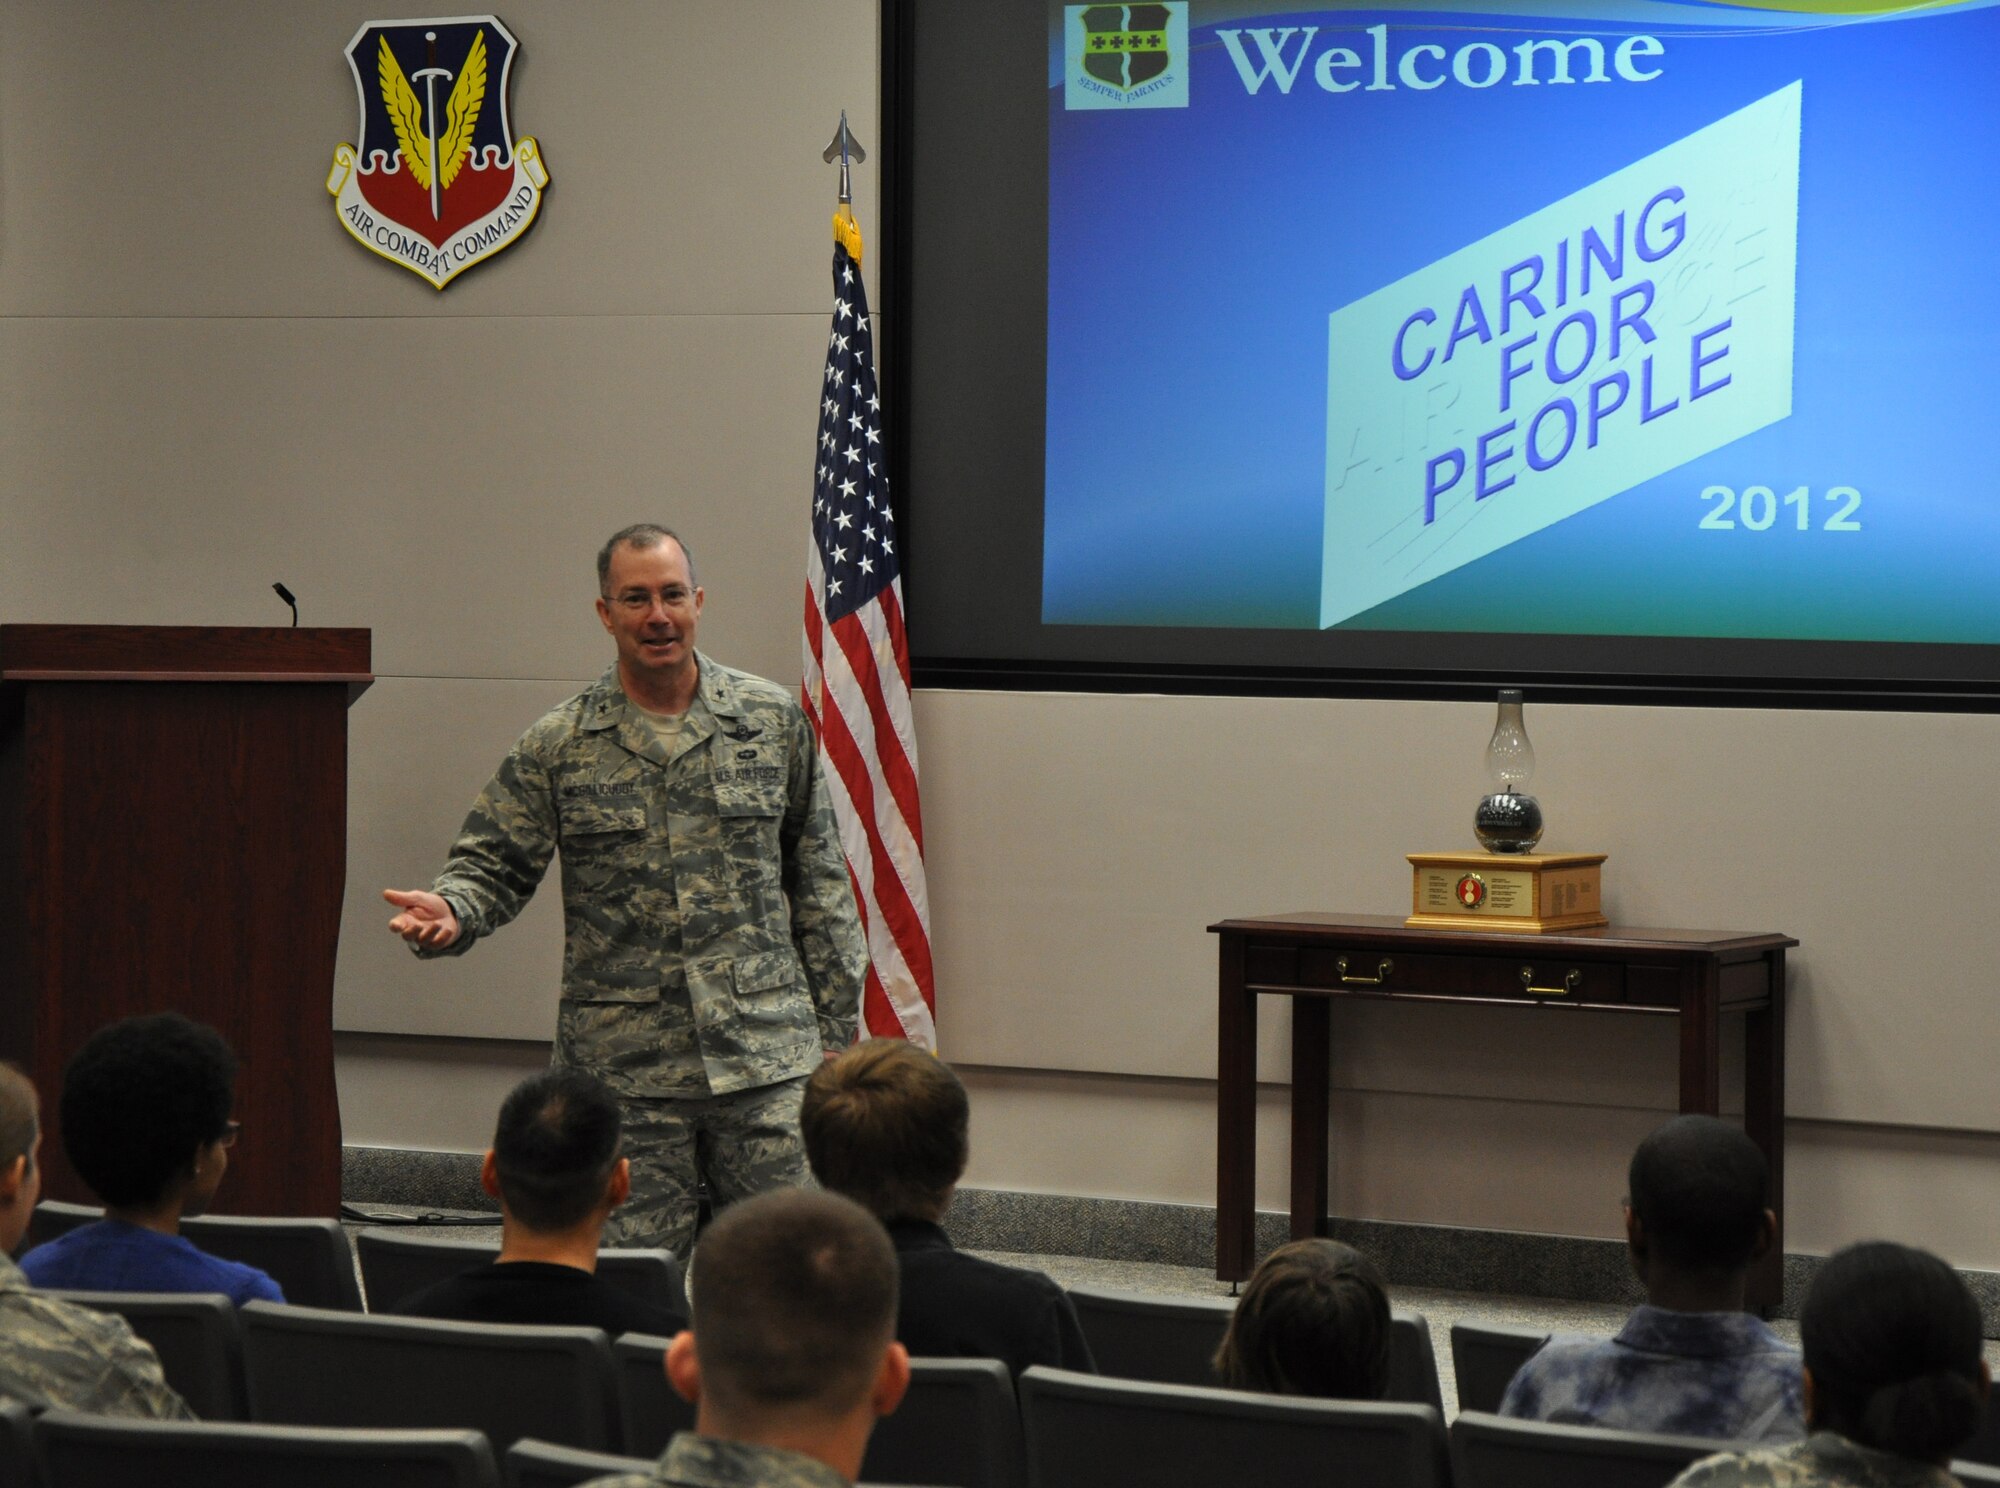 Brig. Gen. Paul McGillicuddy, 9th Reconnaissance Wing commander speaks during the Caring For People Forum at Beale Air Force Base, Calif., March 30, 2012. The forum was set up for members of Team Beale to address base and Air Force concerns. The top two issues were Basic Allowance for Housing for Beale and having a center for the Exceptional Family Member Program at all Air Force bases. (U.S. Air Force photo by Staff Sgt. Robert M. Trujillo/Released) 